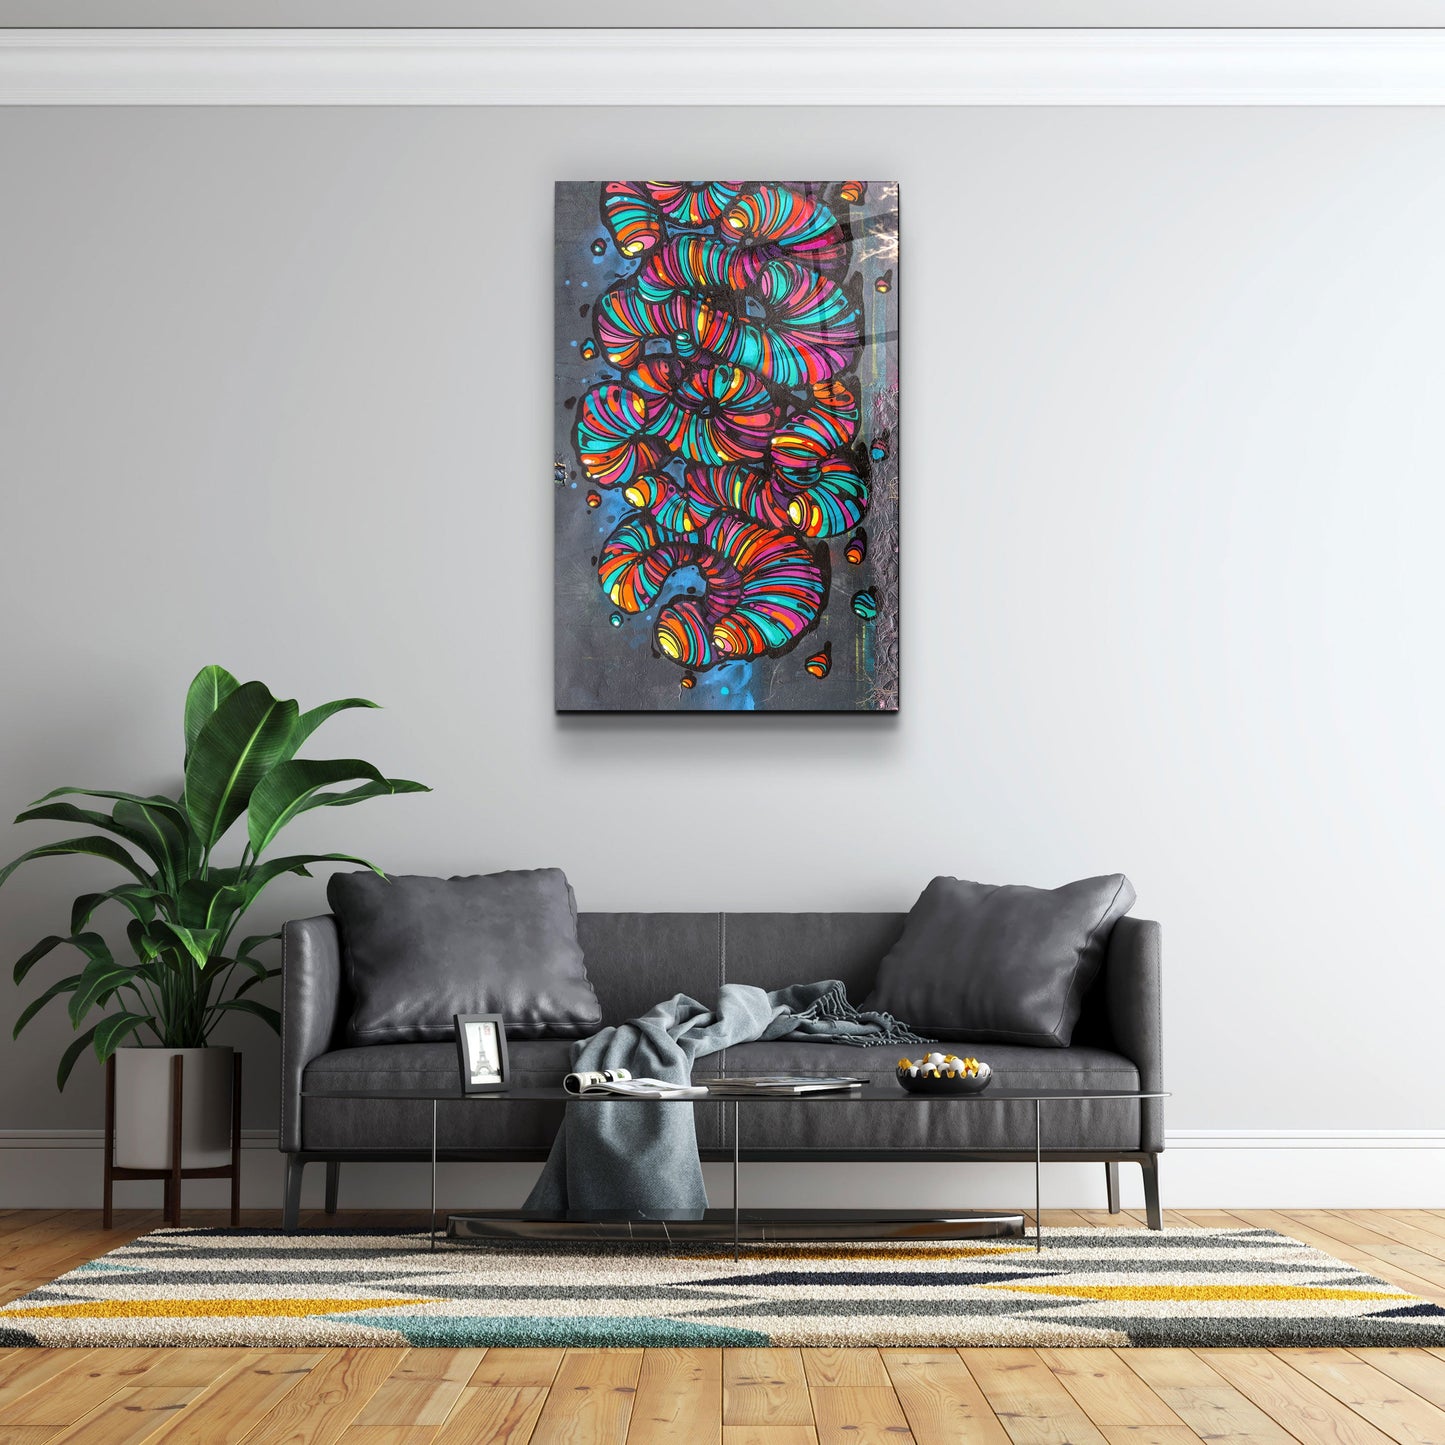 Worms - Designer's Collection Glass Wall Art